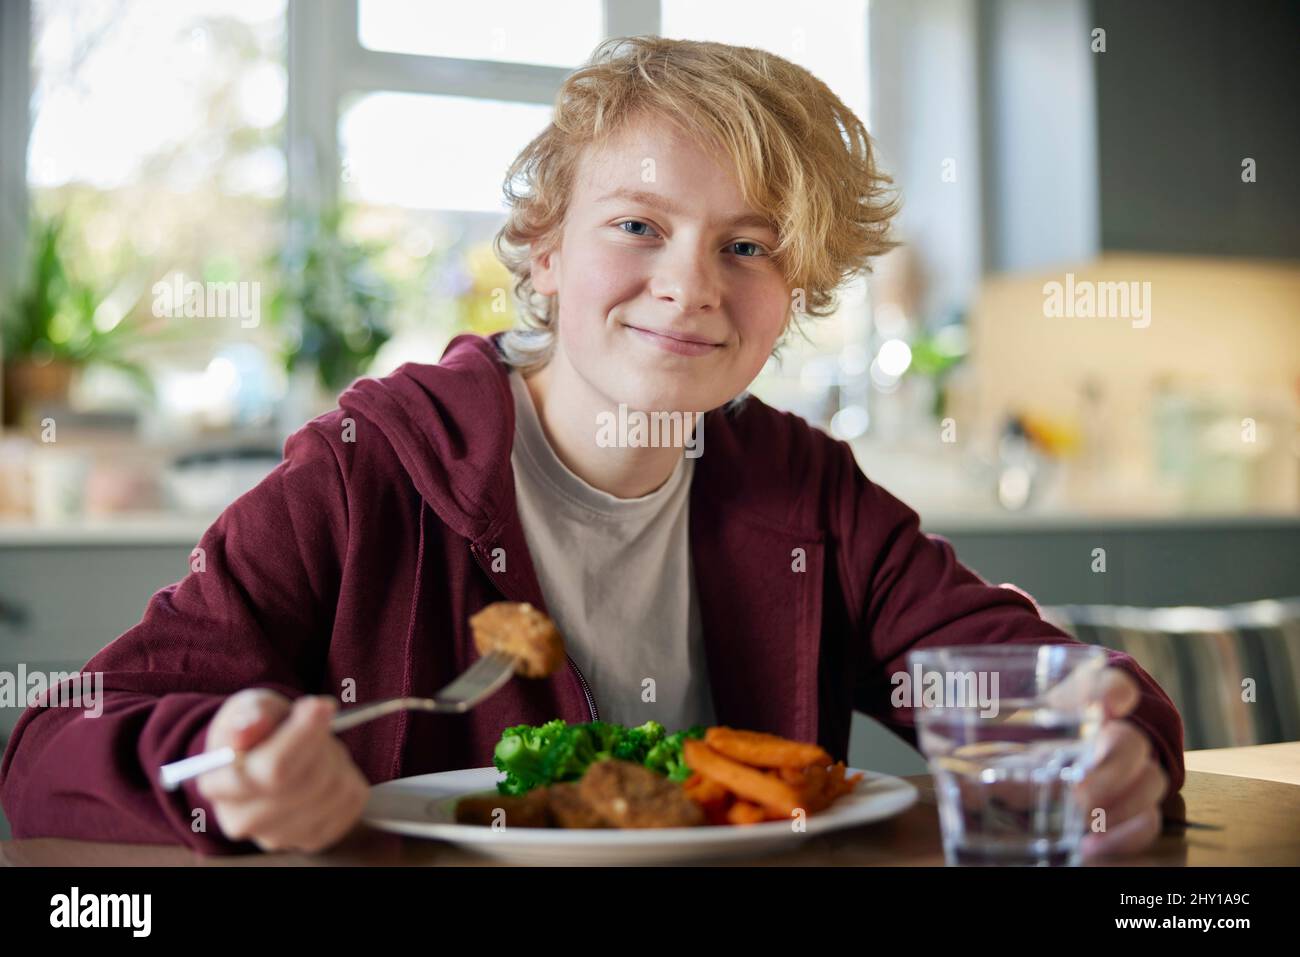 Portrait Of Teeange Girl Eating Vegan Meal Sitting At Table In Kitchen At Home Stock Photo